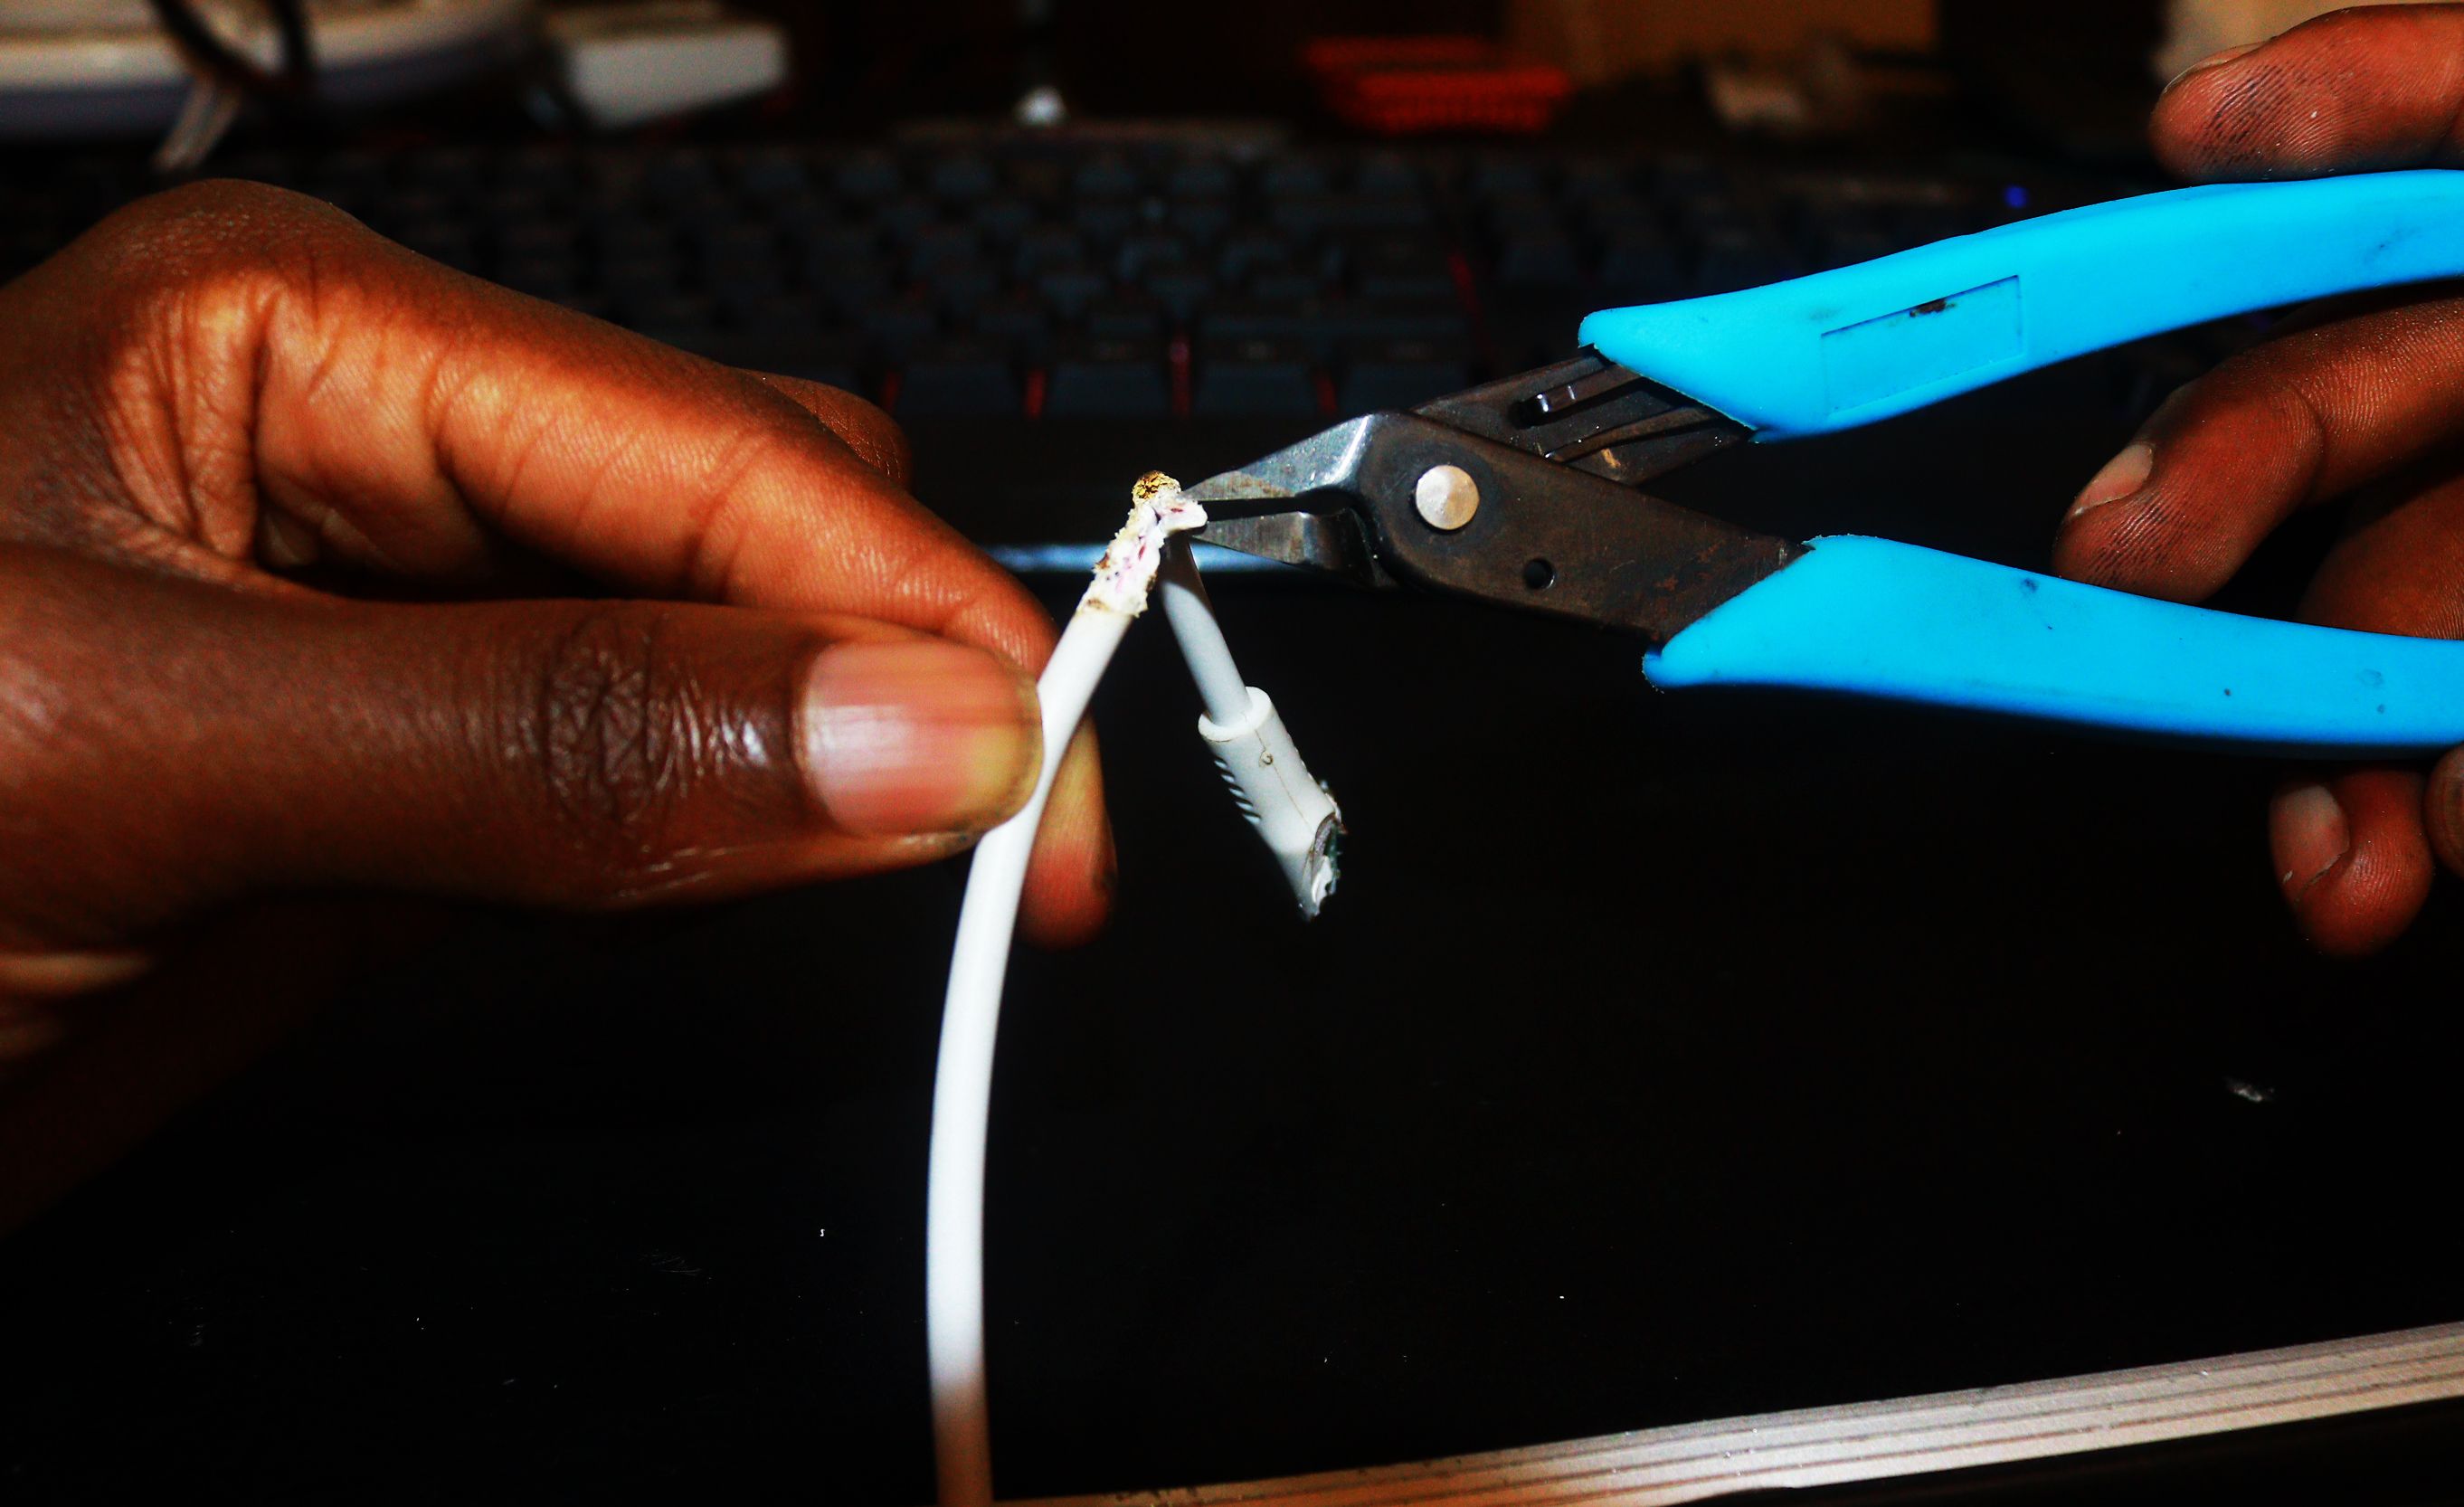 Using a cutting nippers to remove the outer covering of the cable